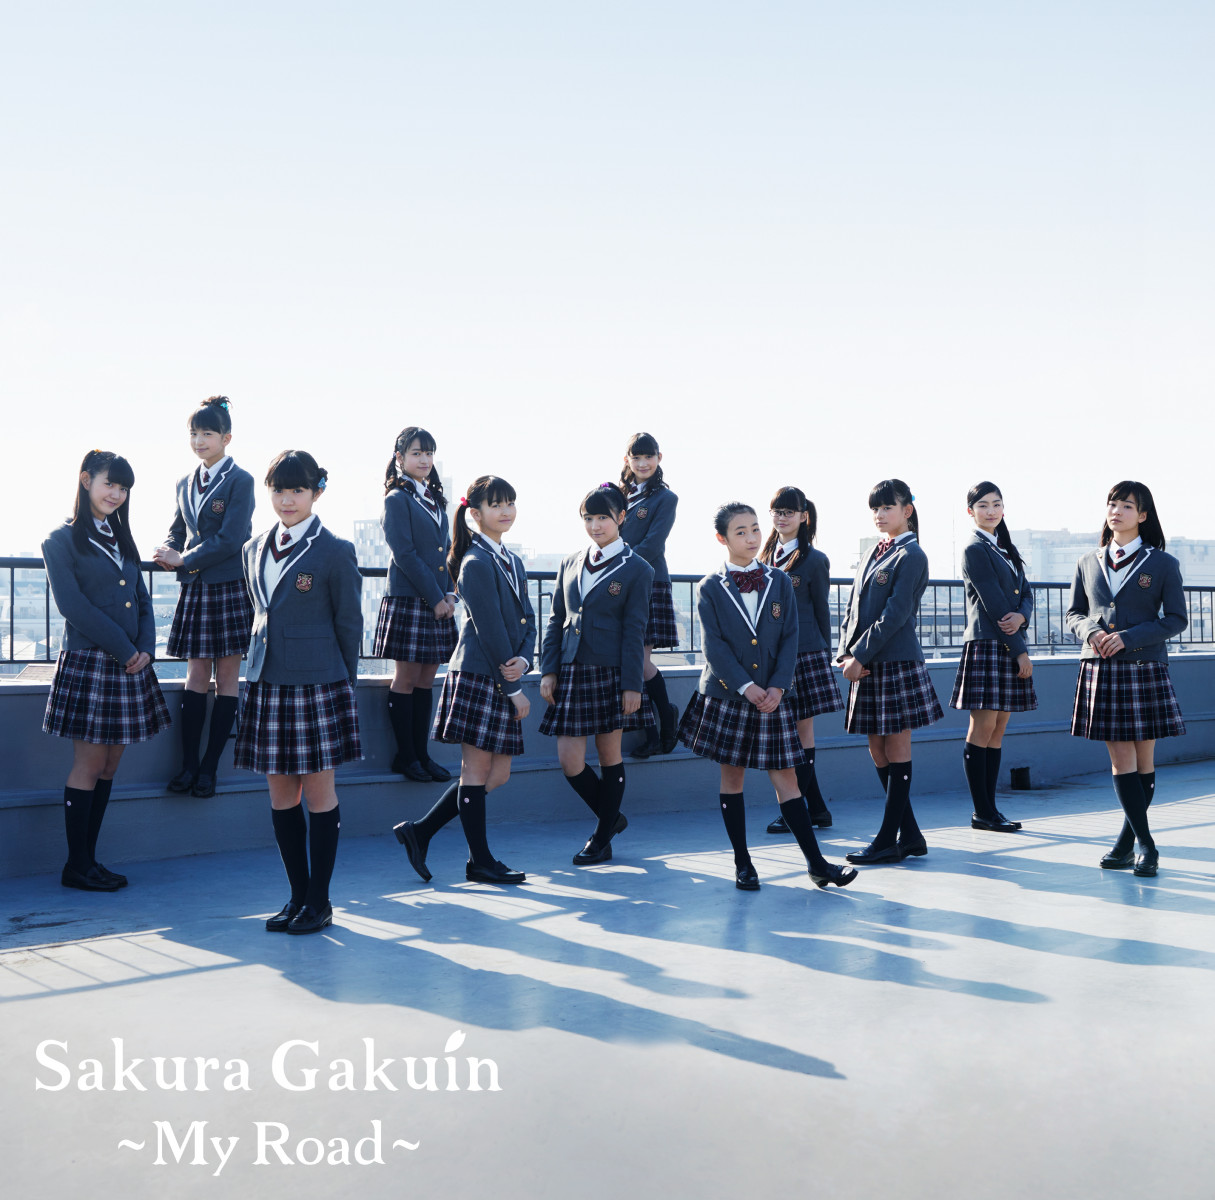 Sakura Gakuin Releases Trailer for Their 8th Album Compiling Songs from 2017